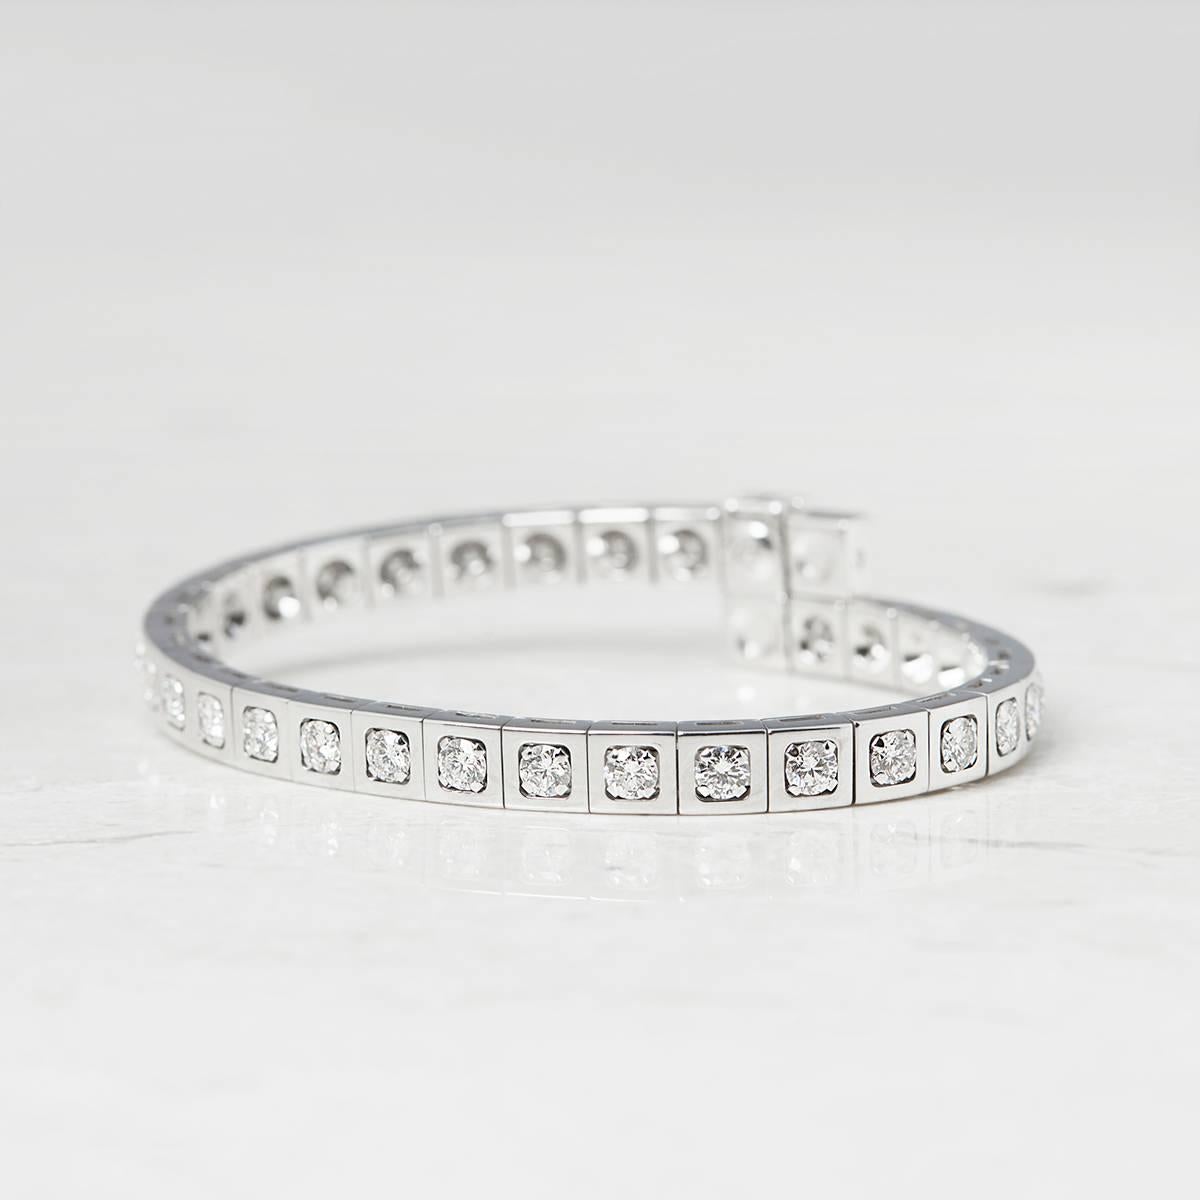 This tectonique bracelet by Cartier features round brilliant cut diamonds, made in 18k white gold. The bracelet has a concealed hinge clasp. Complete with Cartier box & service receipt dated 14/11/2014. Our Xupes reference is COM913 should you need